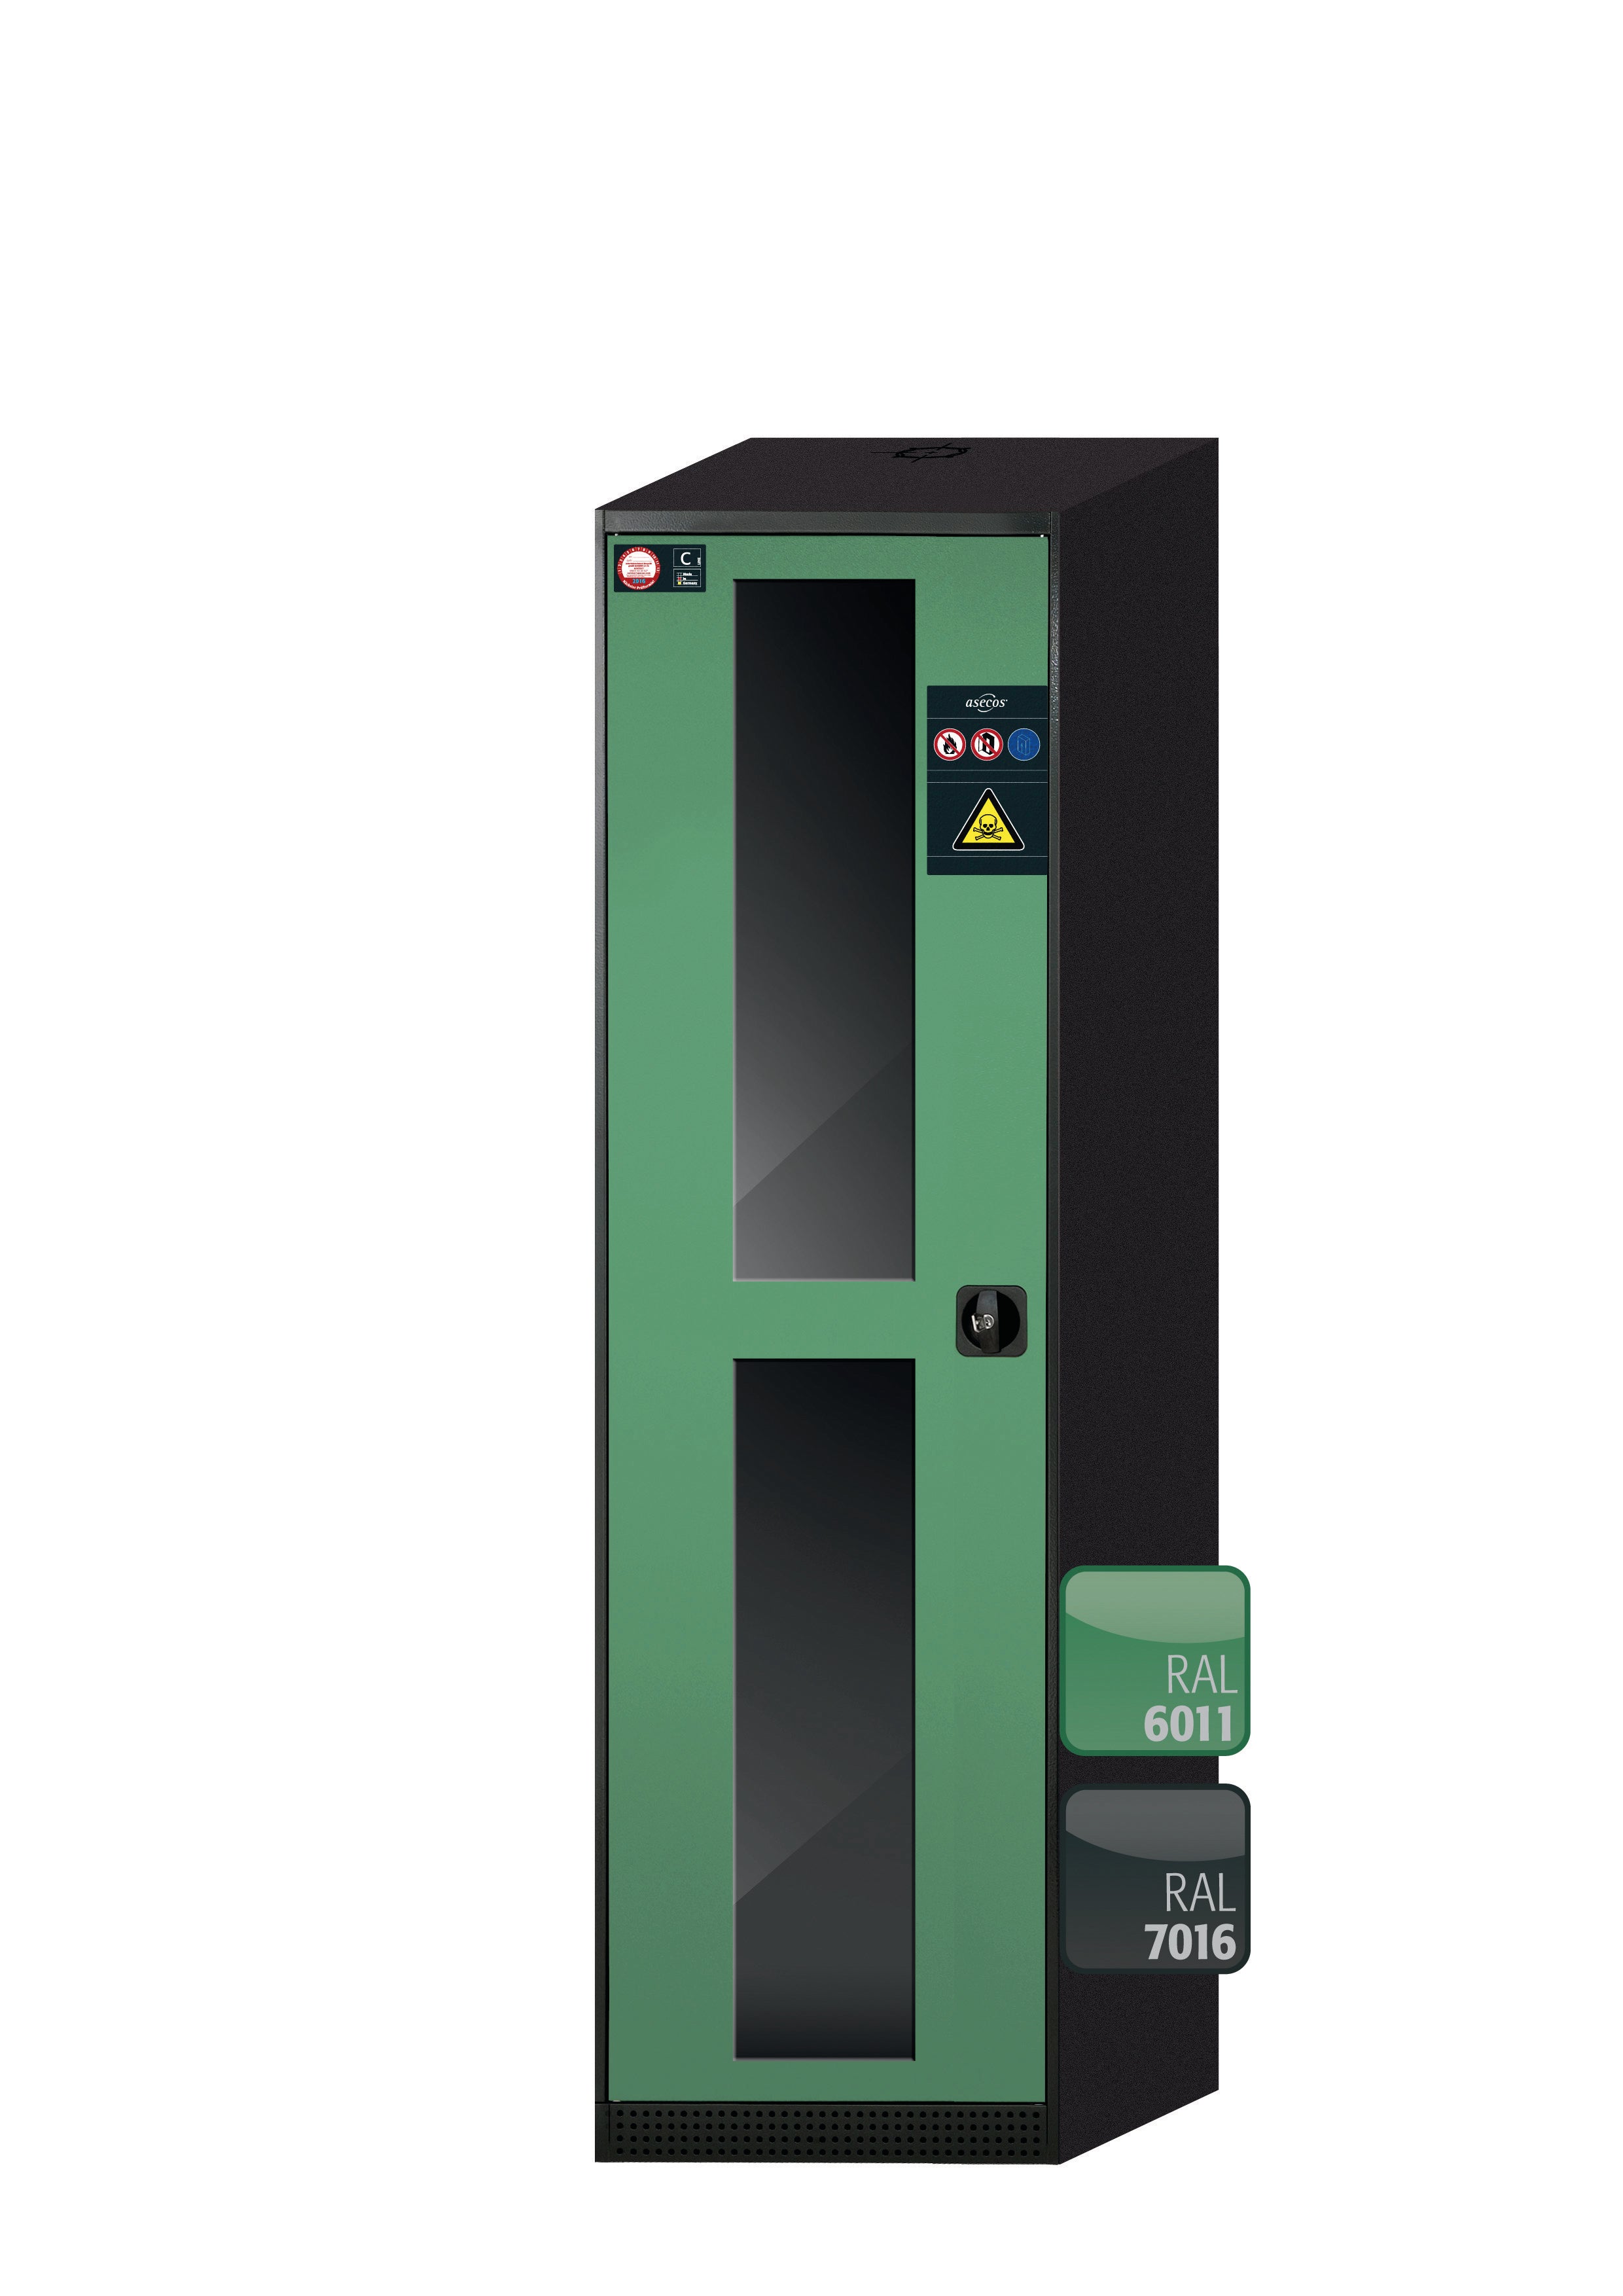 Chemical cabinet CS-CLASSIC-G model CS.195.054.WDFW in reseda green RAL 6011 with 4x AbZ shelf pull-outs (sheet steel/polypropylene)